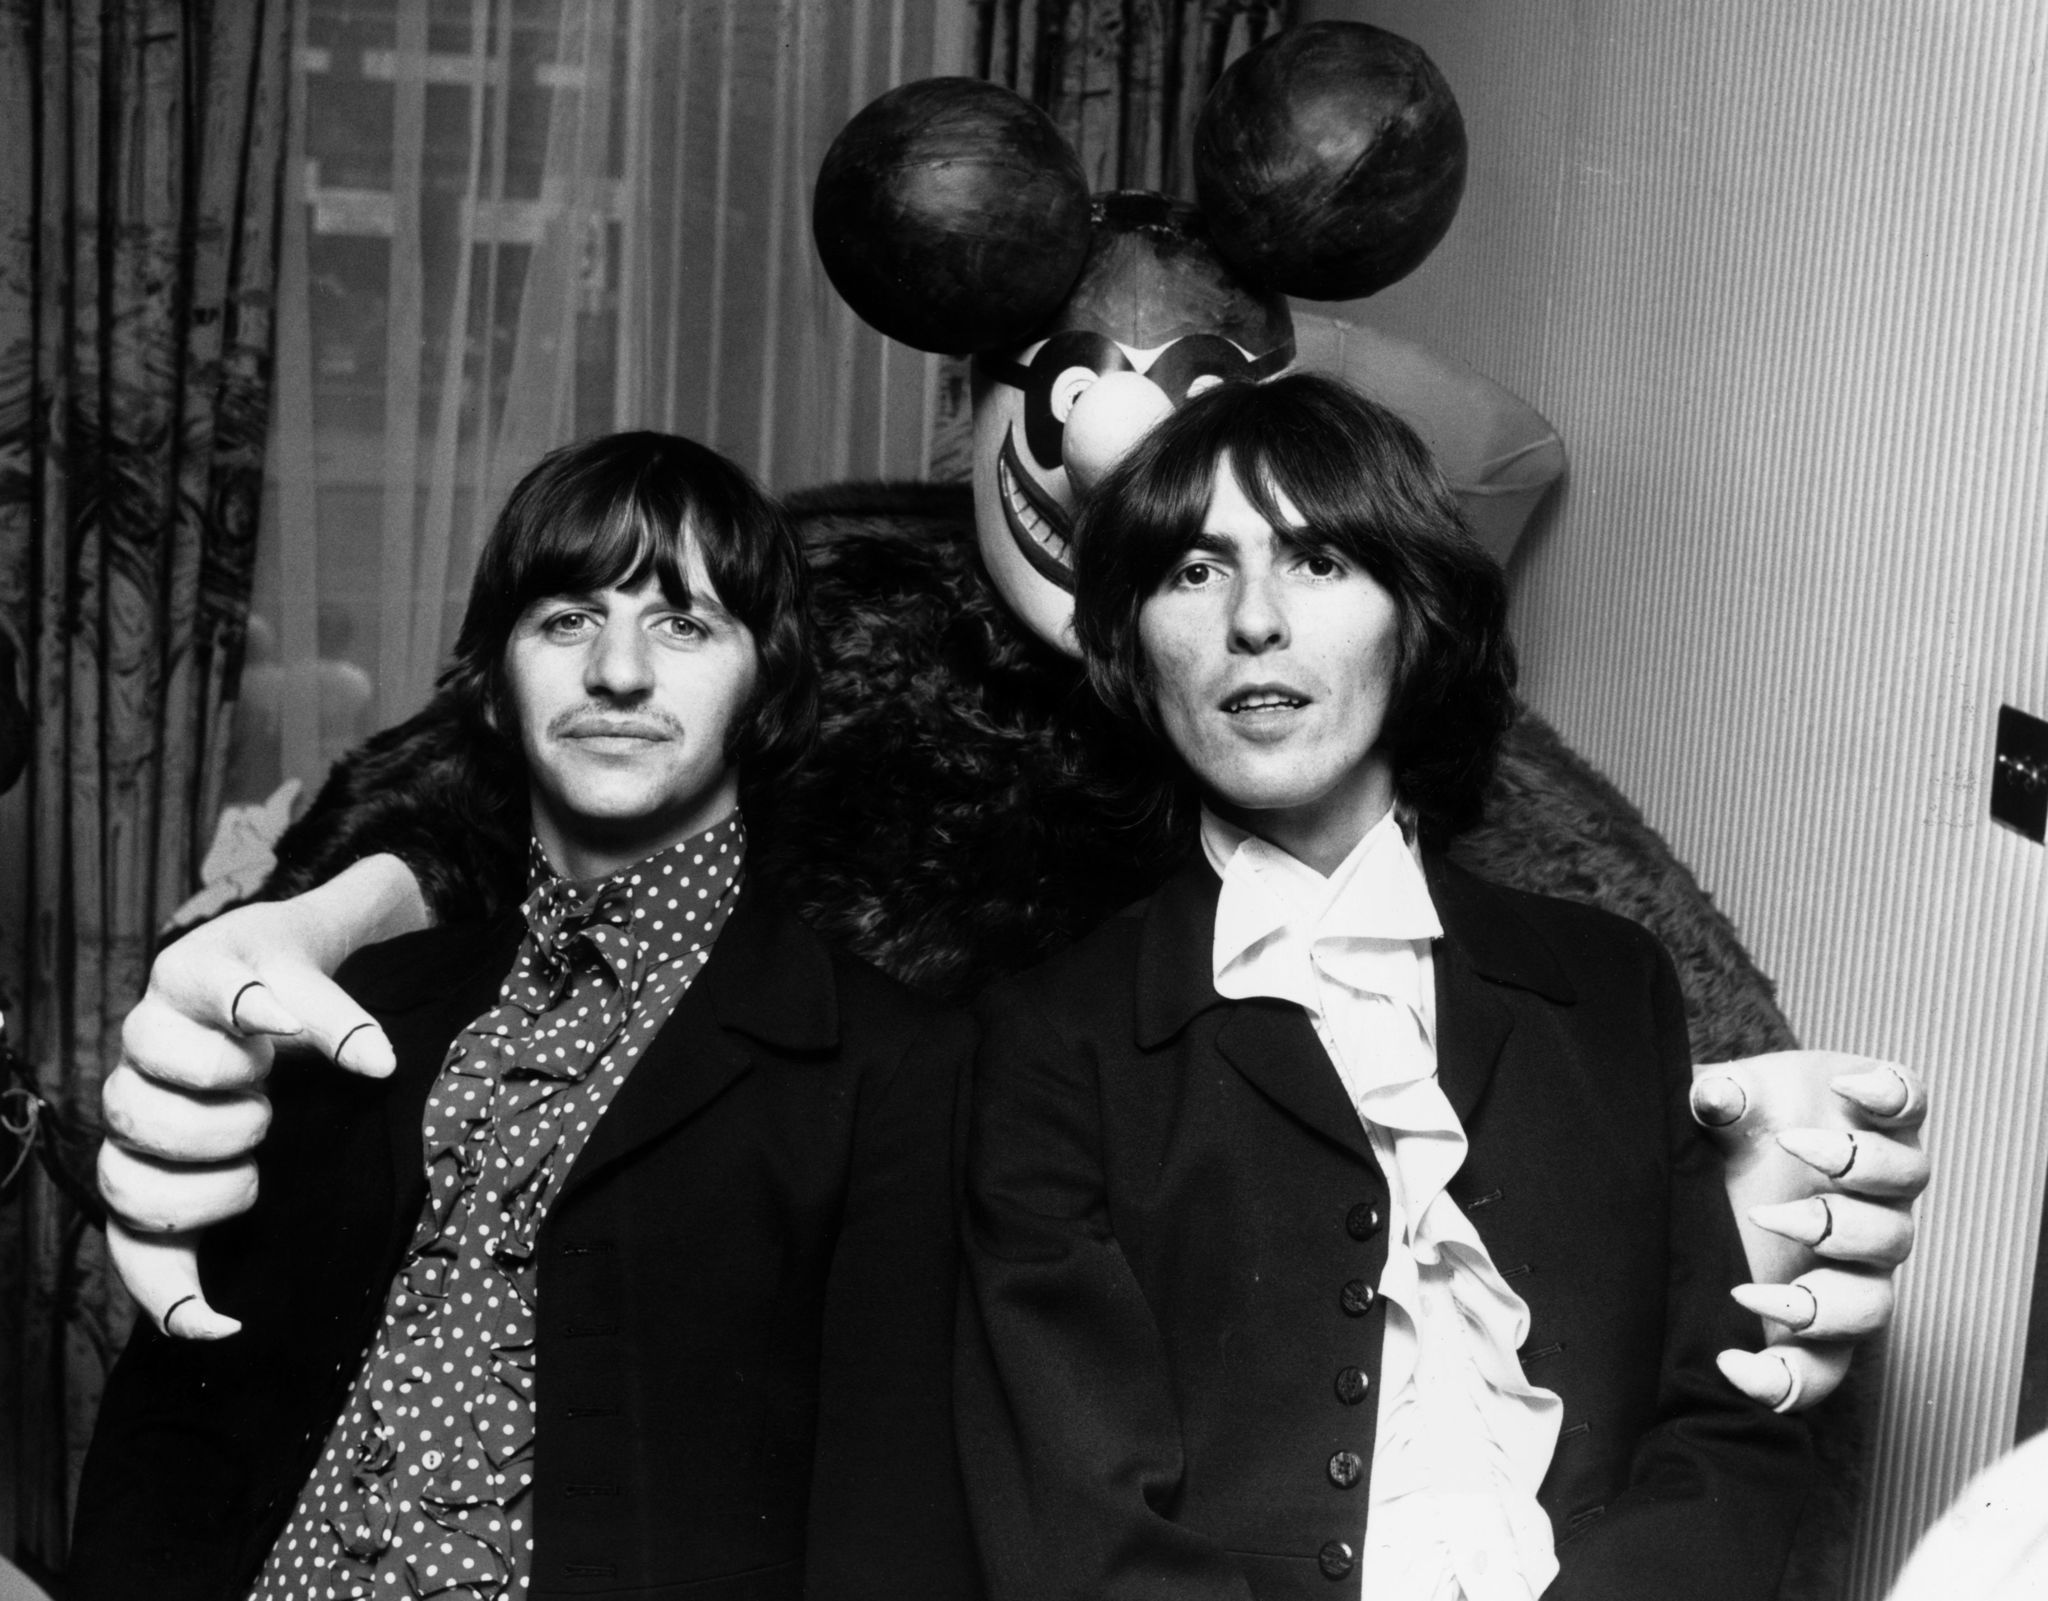 Ringo Starr (L) and George Harrison are embraced by a 